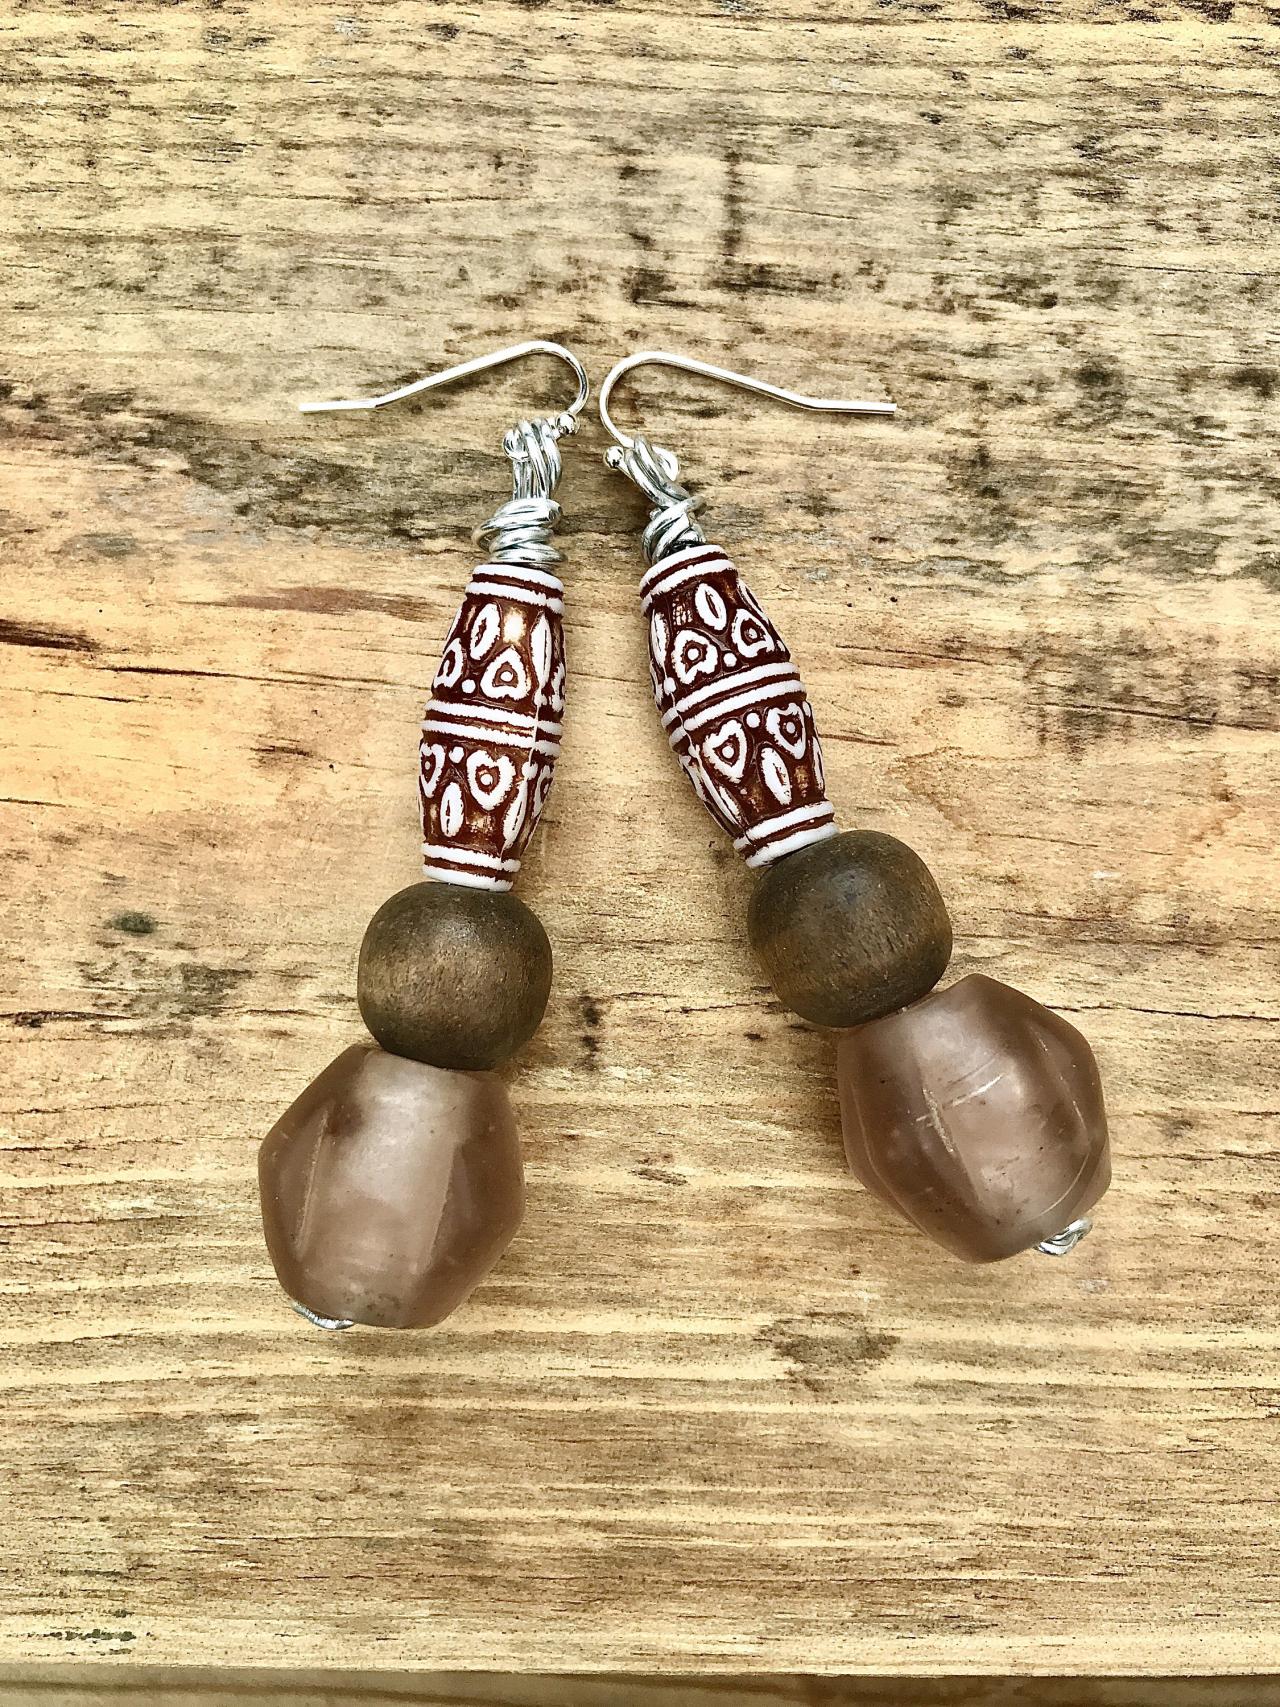 Gorgeous Recycled African Bottle Glass Ceramic And Wooden Beads Earrings With Sterling Silver Wires.